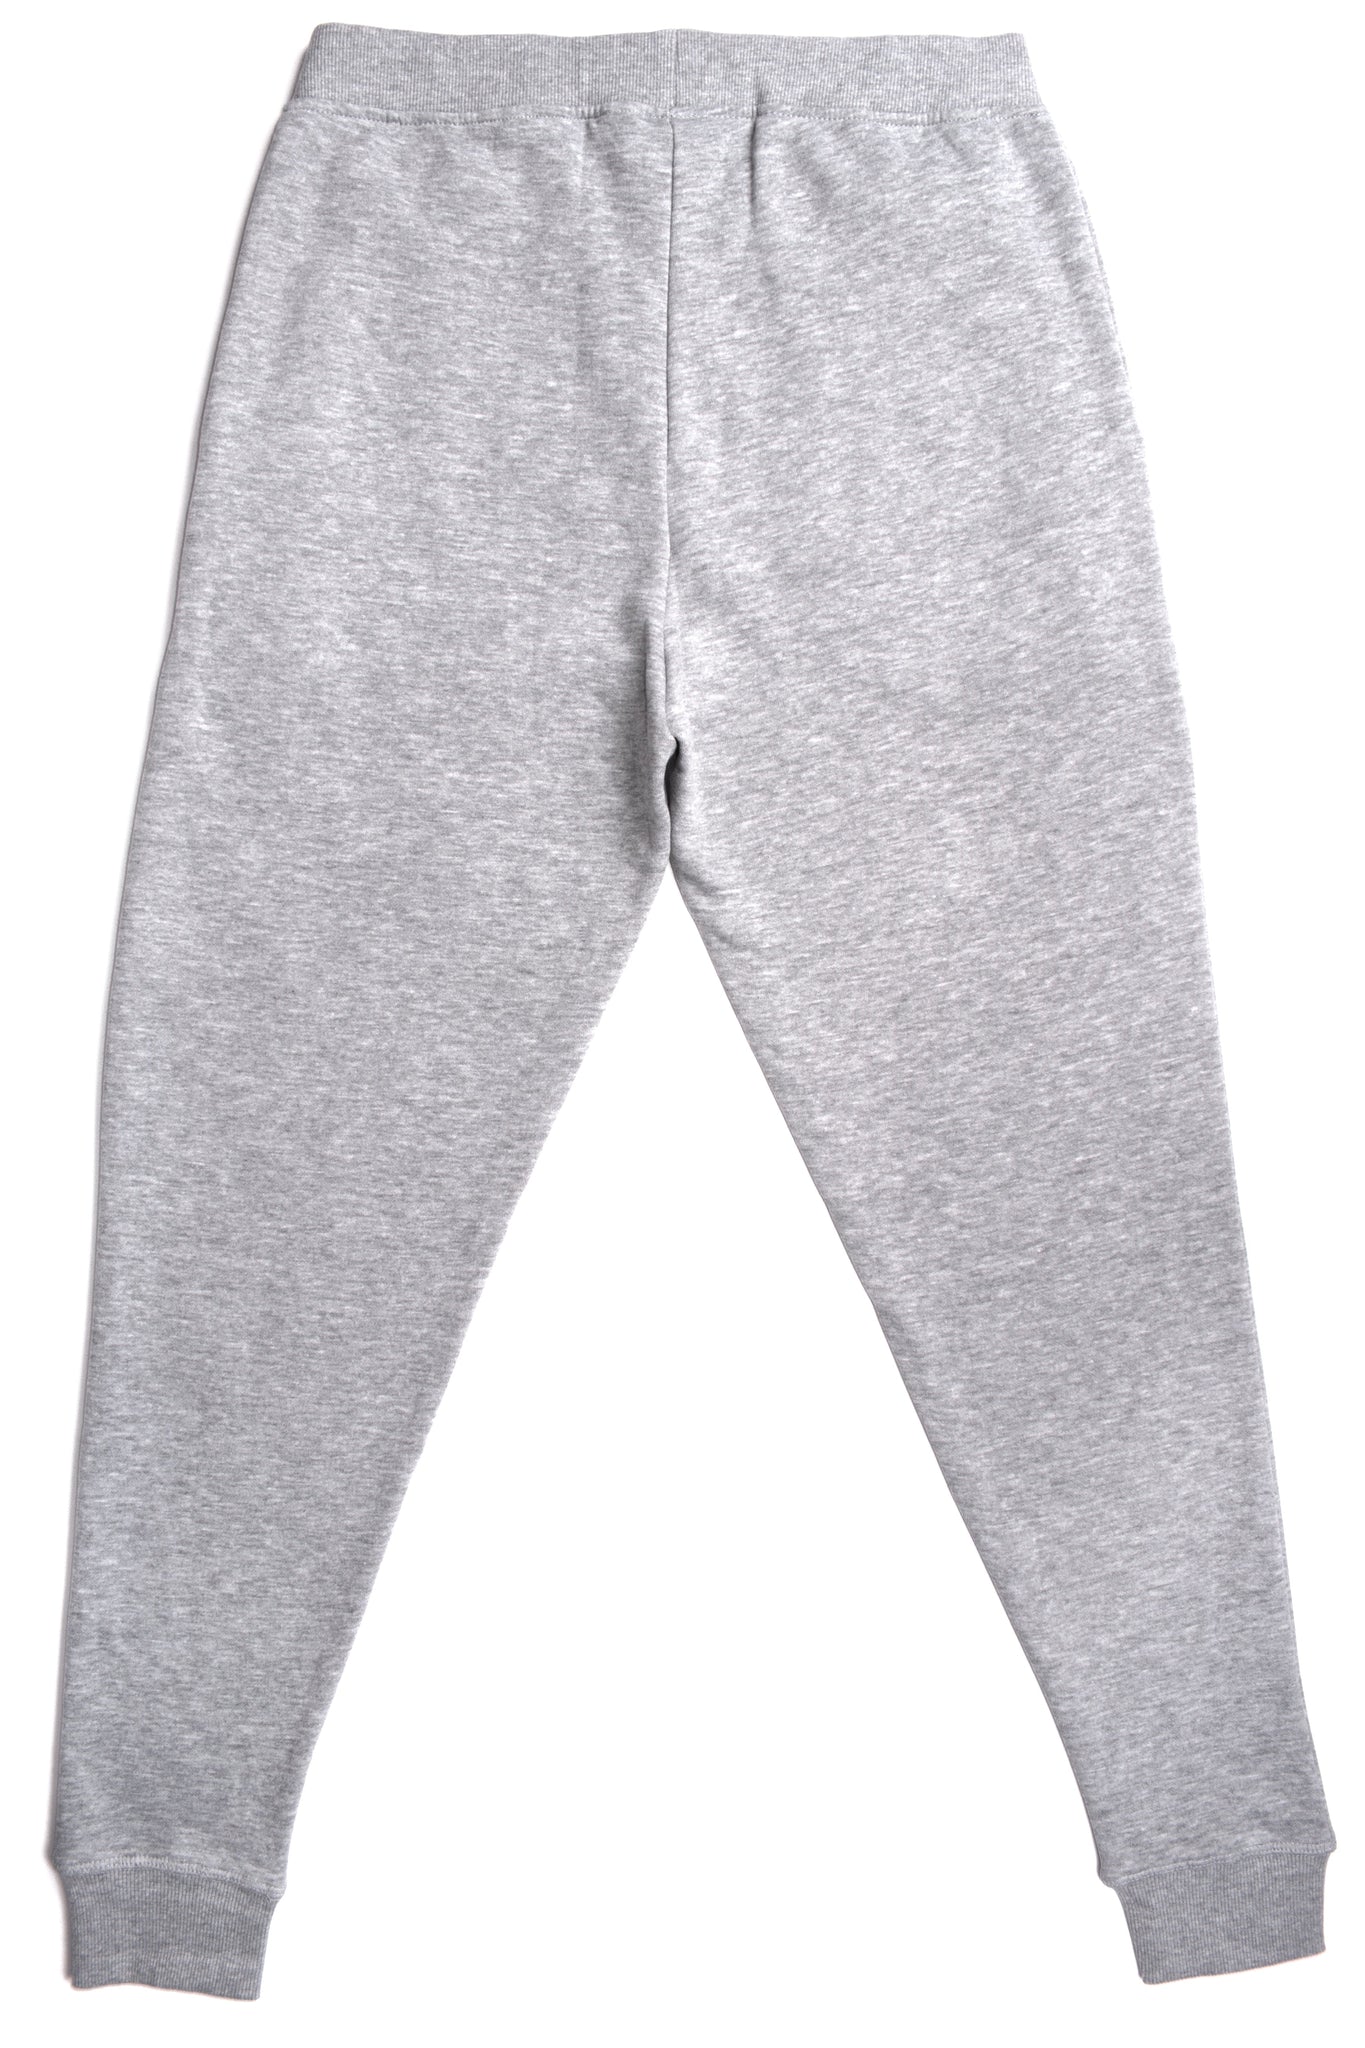 HERO - 5020R Youth Joggers - Sport Grey (Relaxed Fit)